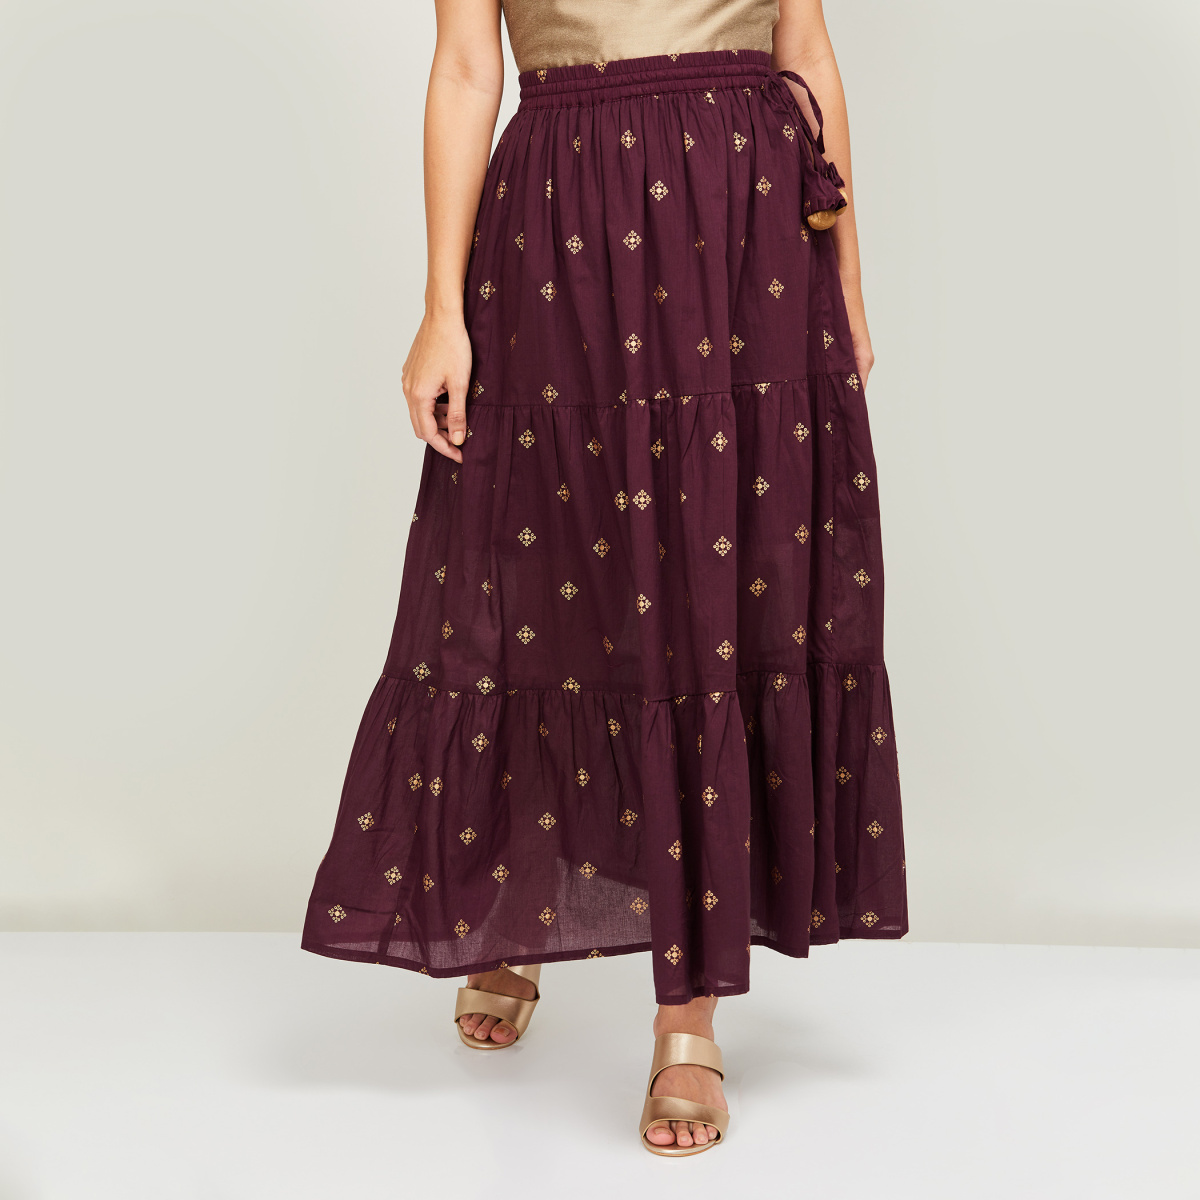 Buy online Georgette Ethnic Maxi Skirt With Tassel from Skirts  Shorts for  Women by Klick2style for 1398 at 0 off  2023 Limeroadcom